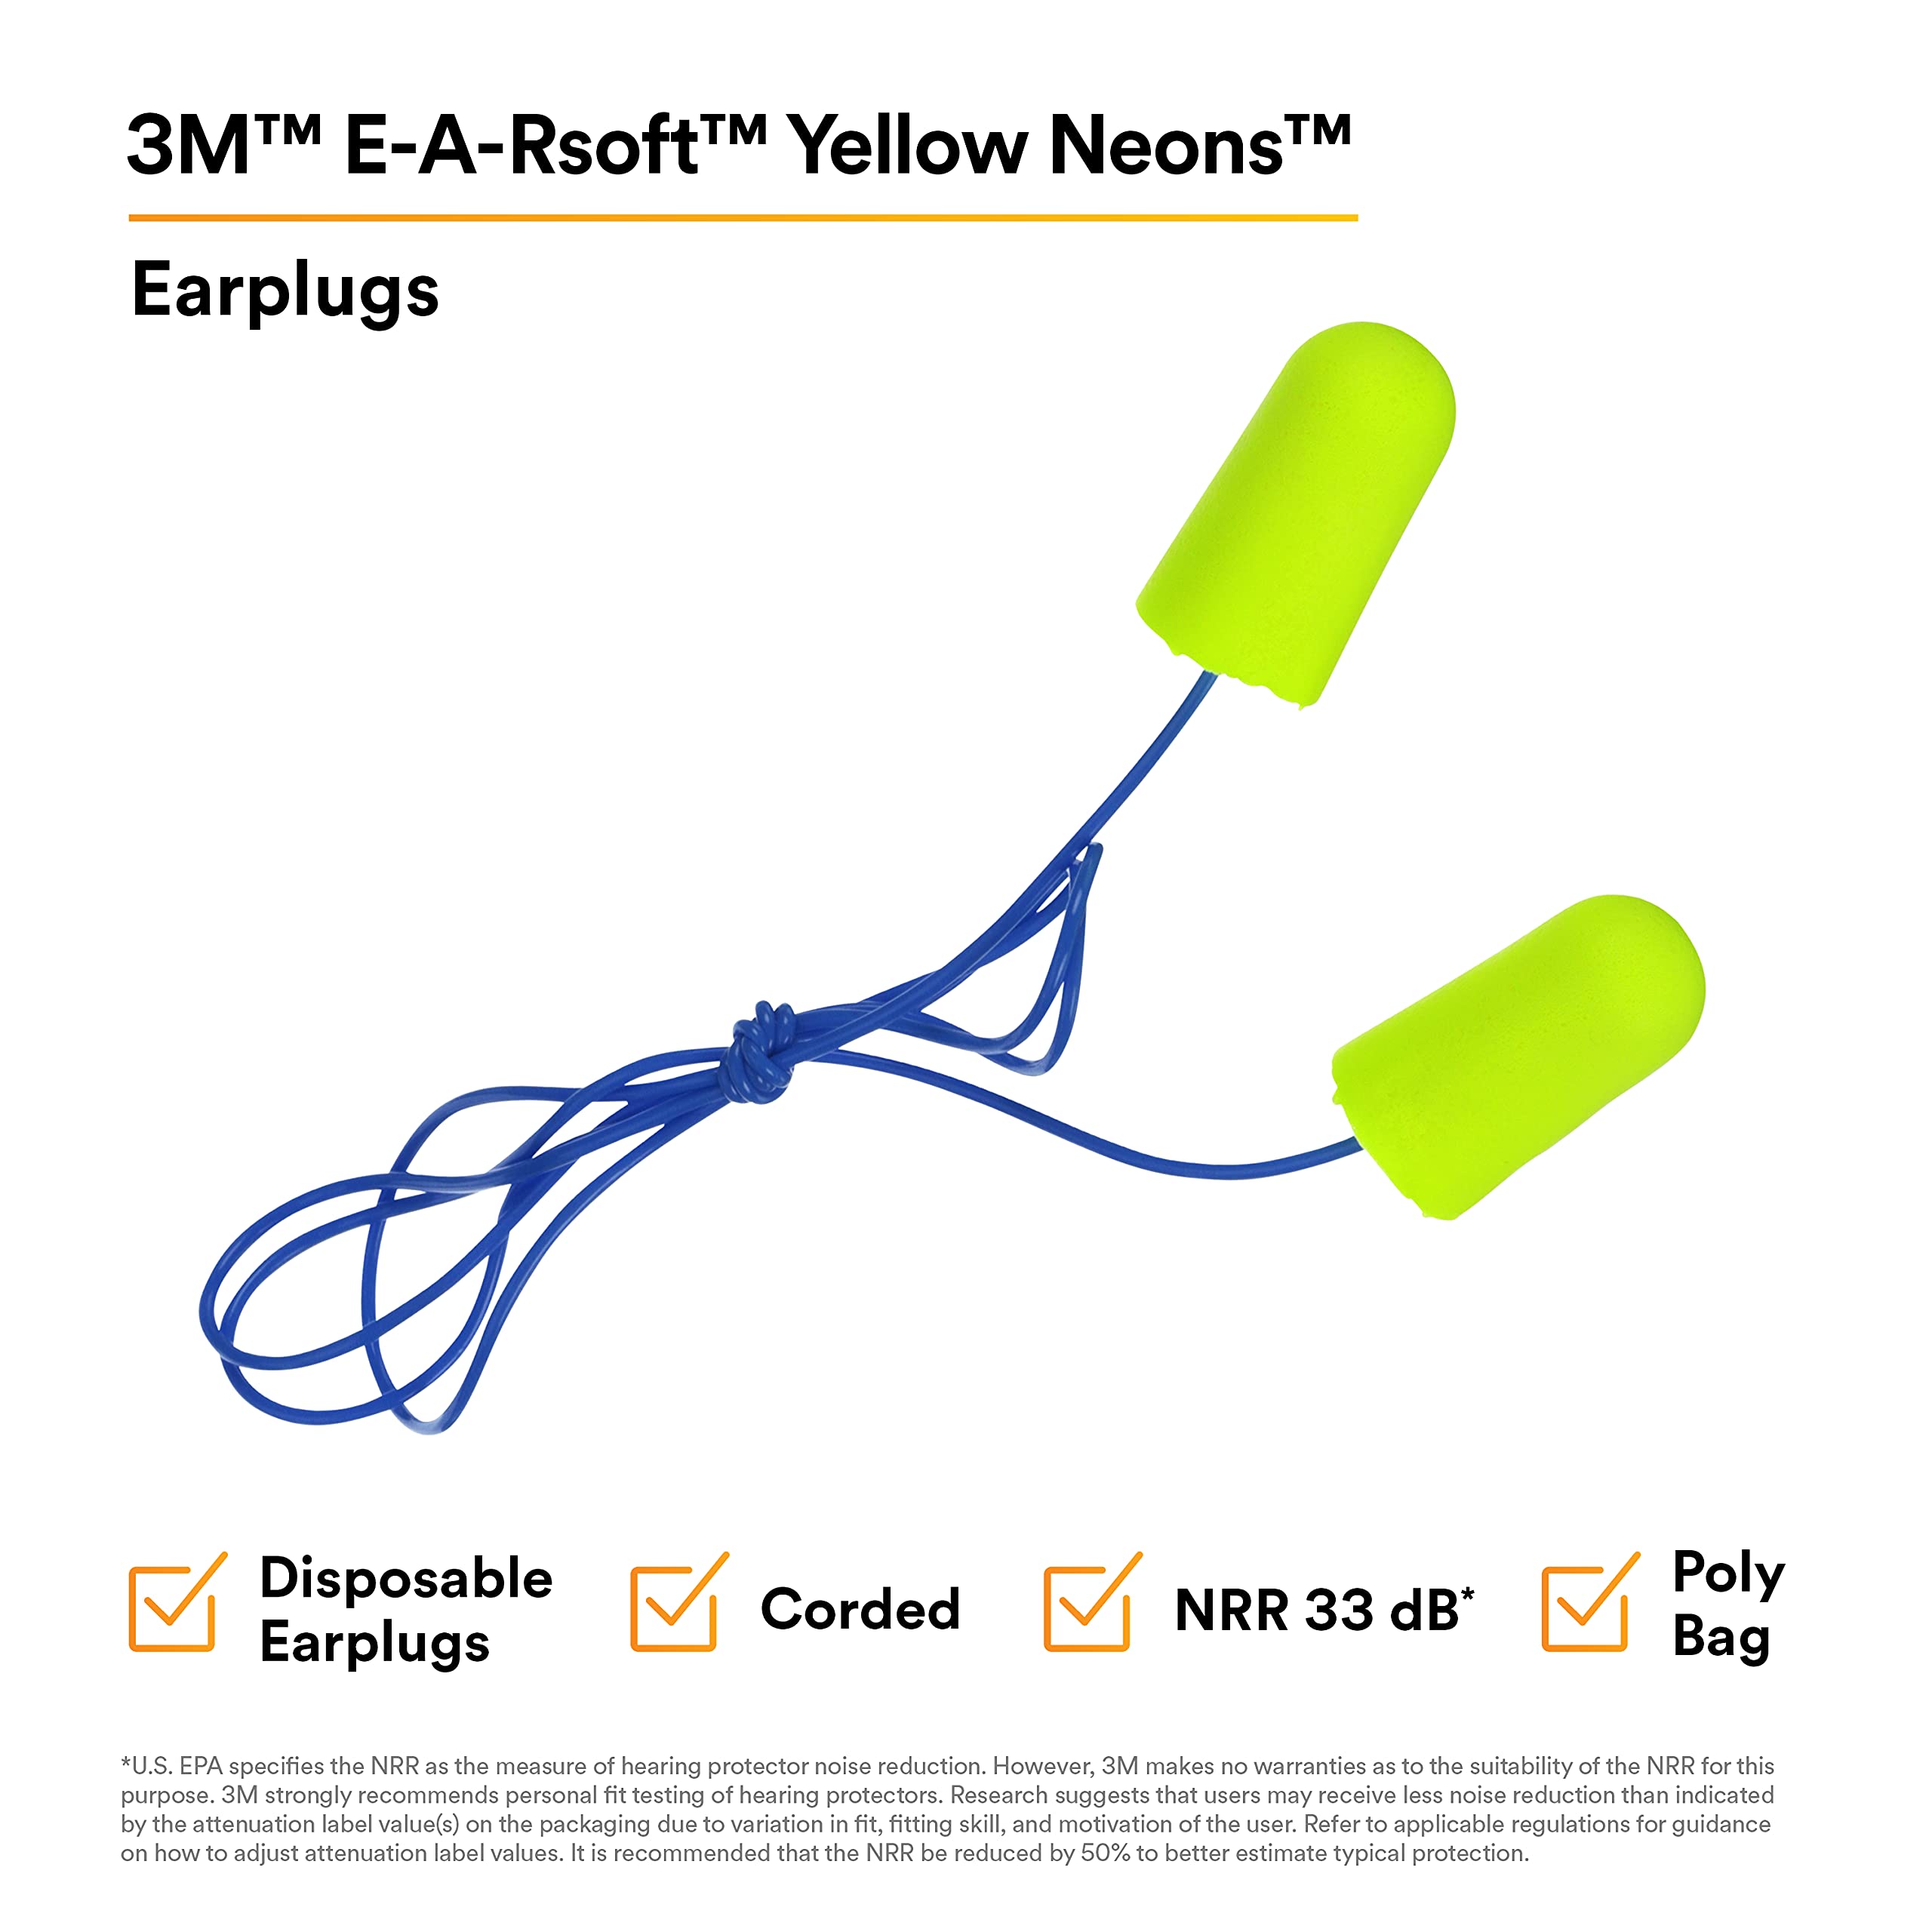 3M Ear Plugs, 200/Box, E-A-Rsoft Yellow Neons 311-1250, Corded, Disposable, Foam, NRR 33, Drilling, Grinding, Machining, Sawing, Sanding, Welding, 1/Poly Bag